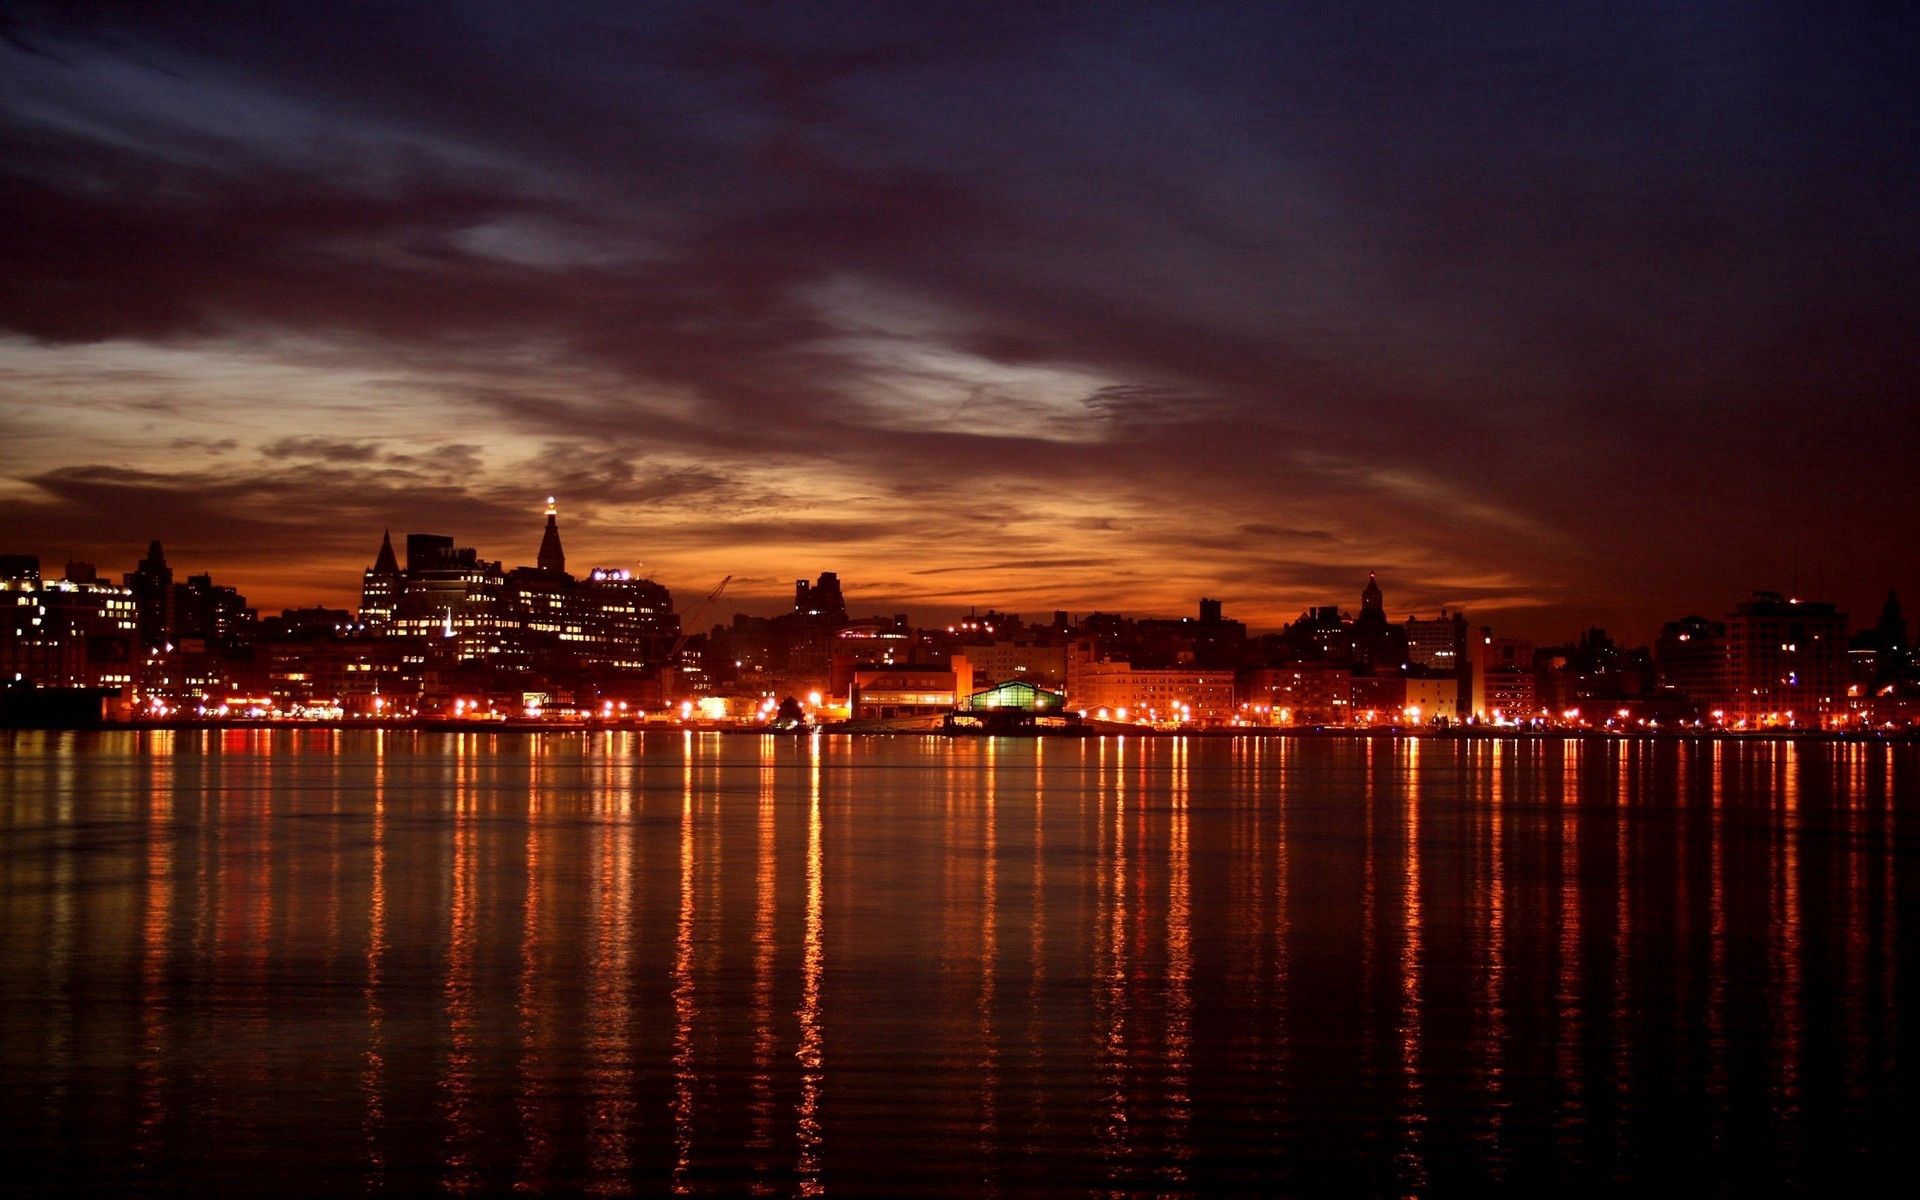 landscape, cities, water, houses, sky, building, lights, reflection, skyscrapers, evening, view, bay, embankment, quay